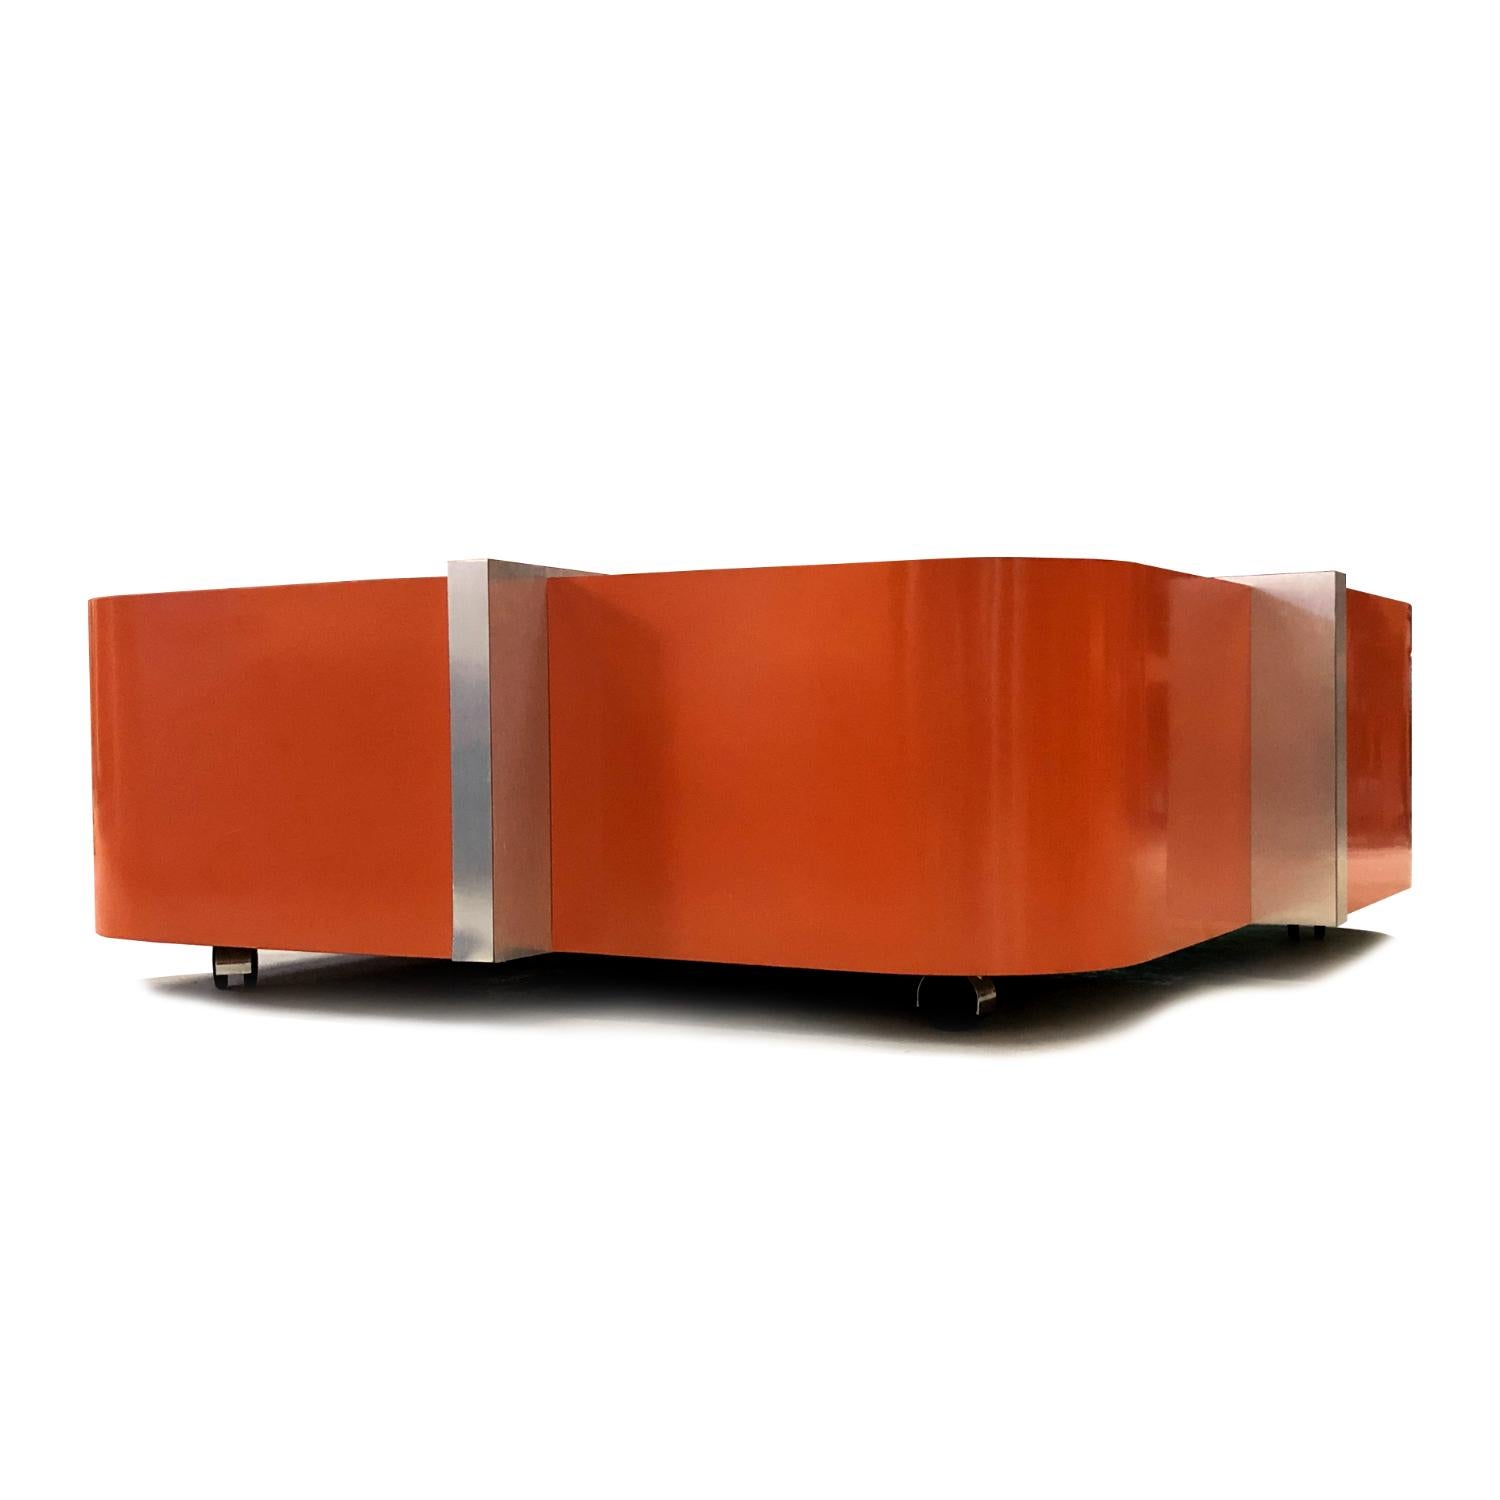 Bold is an understatement when it comes to the Cinnabar coffee table by Flair Home orange Mid-Century Modern coffee table. Everything about this table is loud. The table is a large rounded square separated into quadrants by panels of brushed